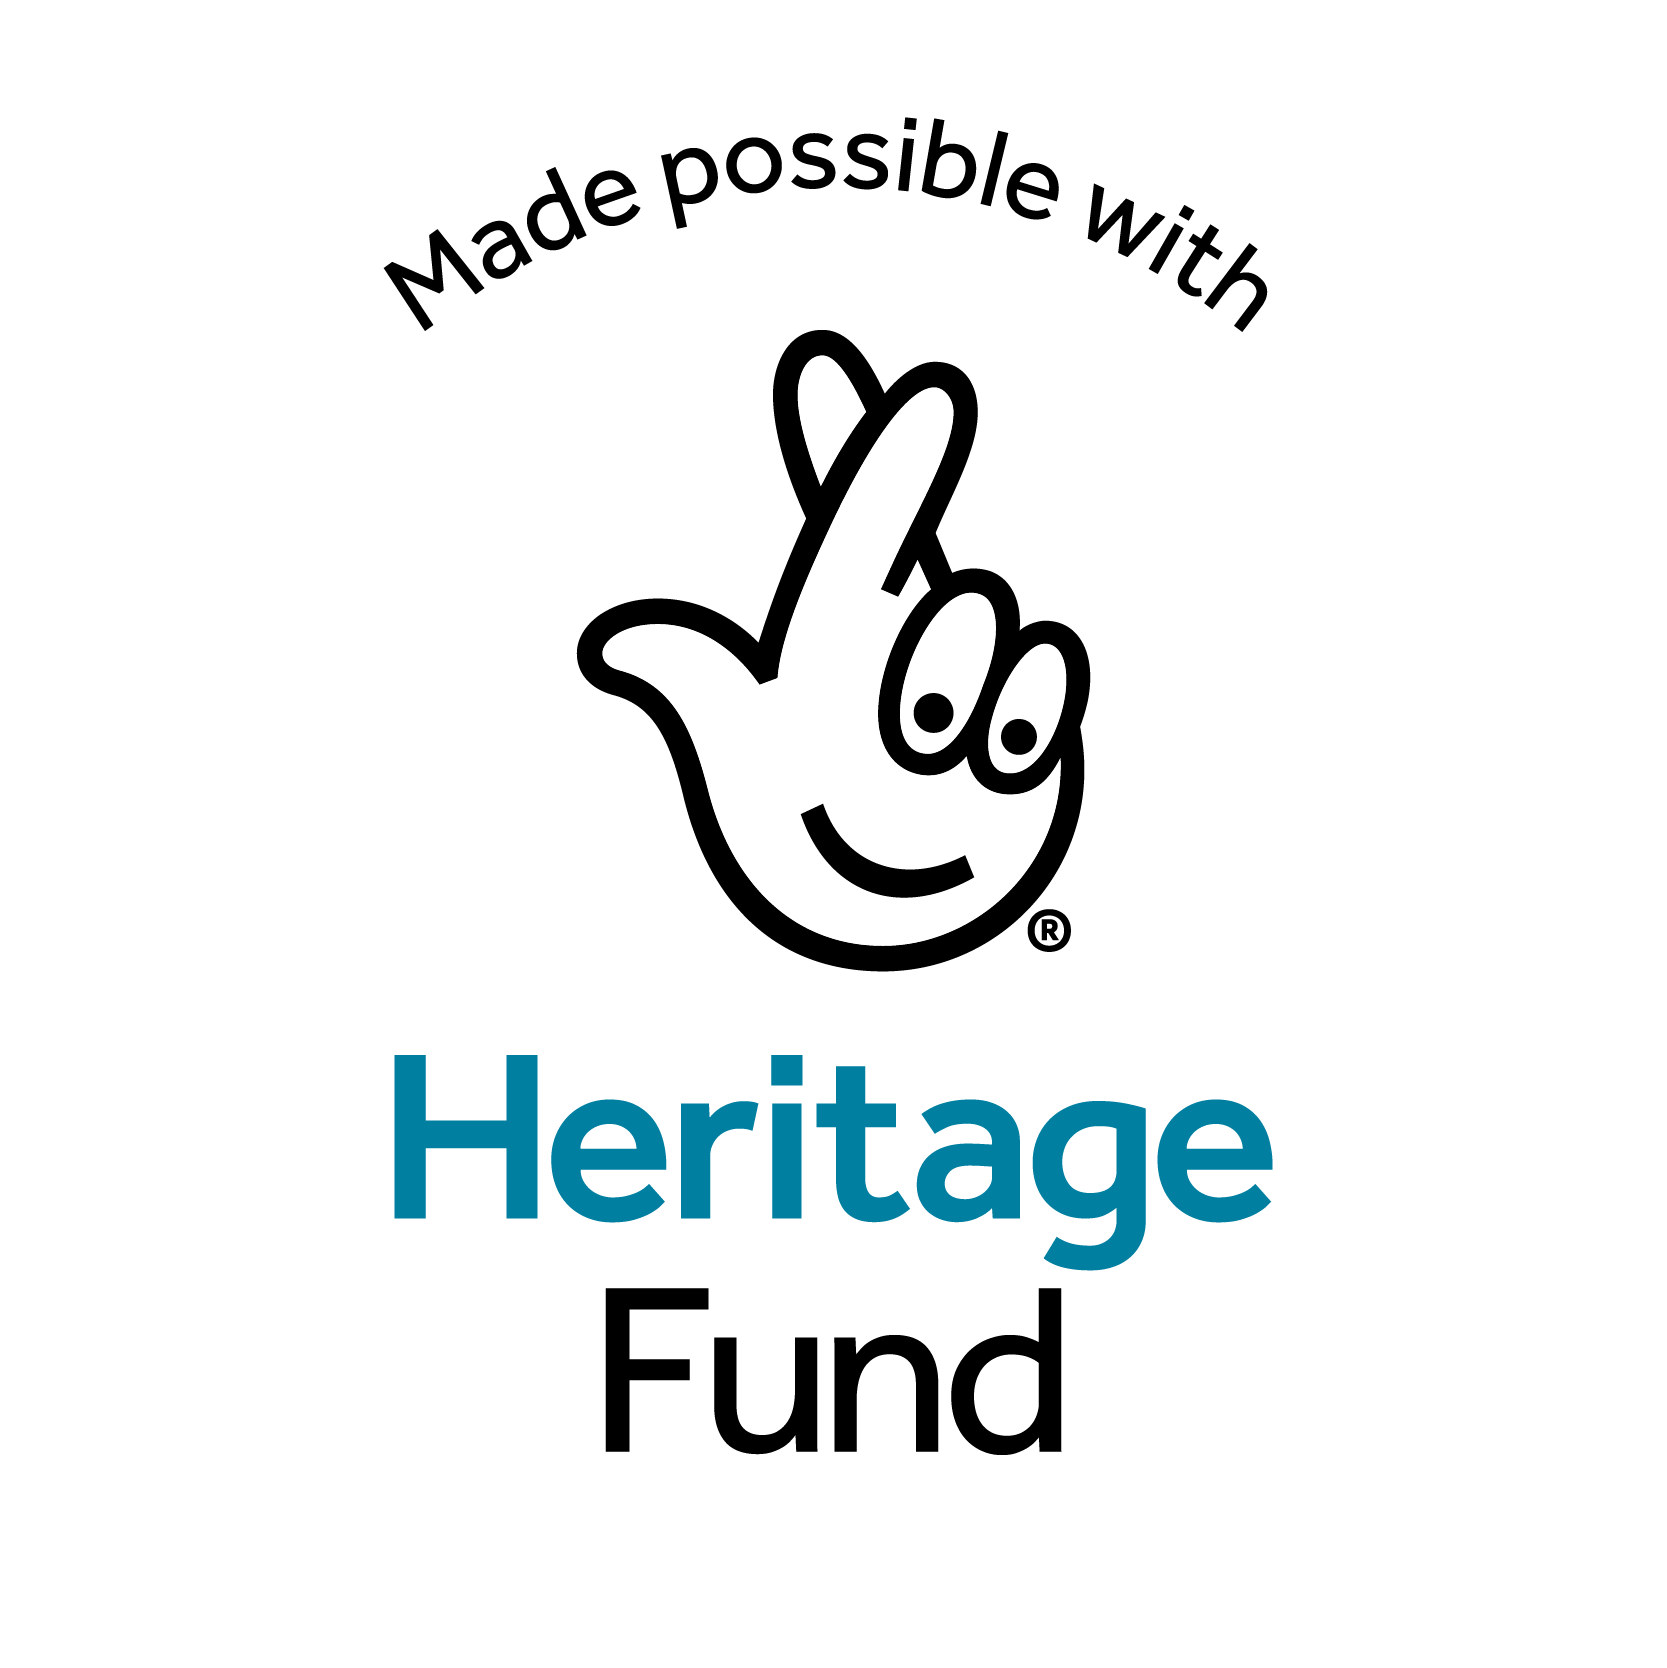 Made possible with Heritage Fund